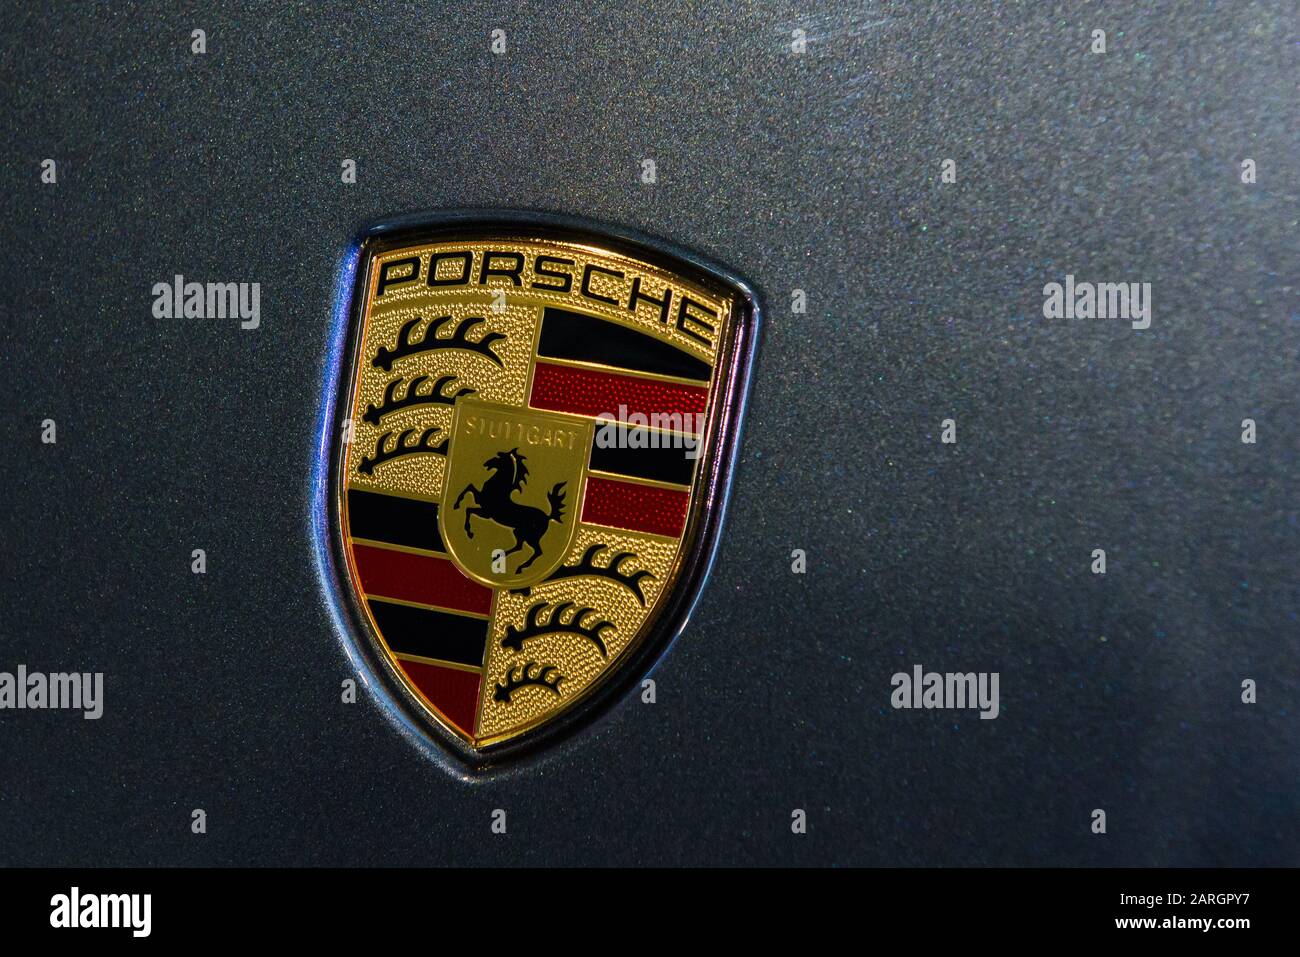 RIGA, LATVIA. 22nd January 2020. Porsche company logo on Porsche car. Porsche is a German automobile manufacturer specializing in high-performance sports cars, SUVs and sedans. Stock Photo